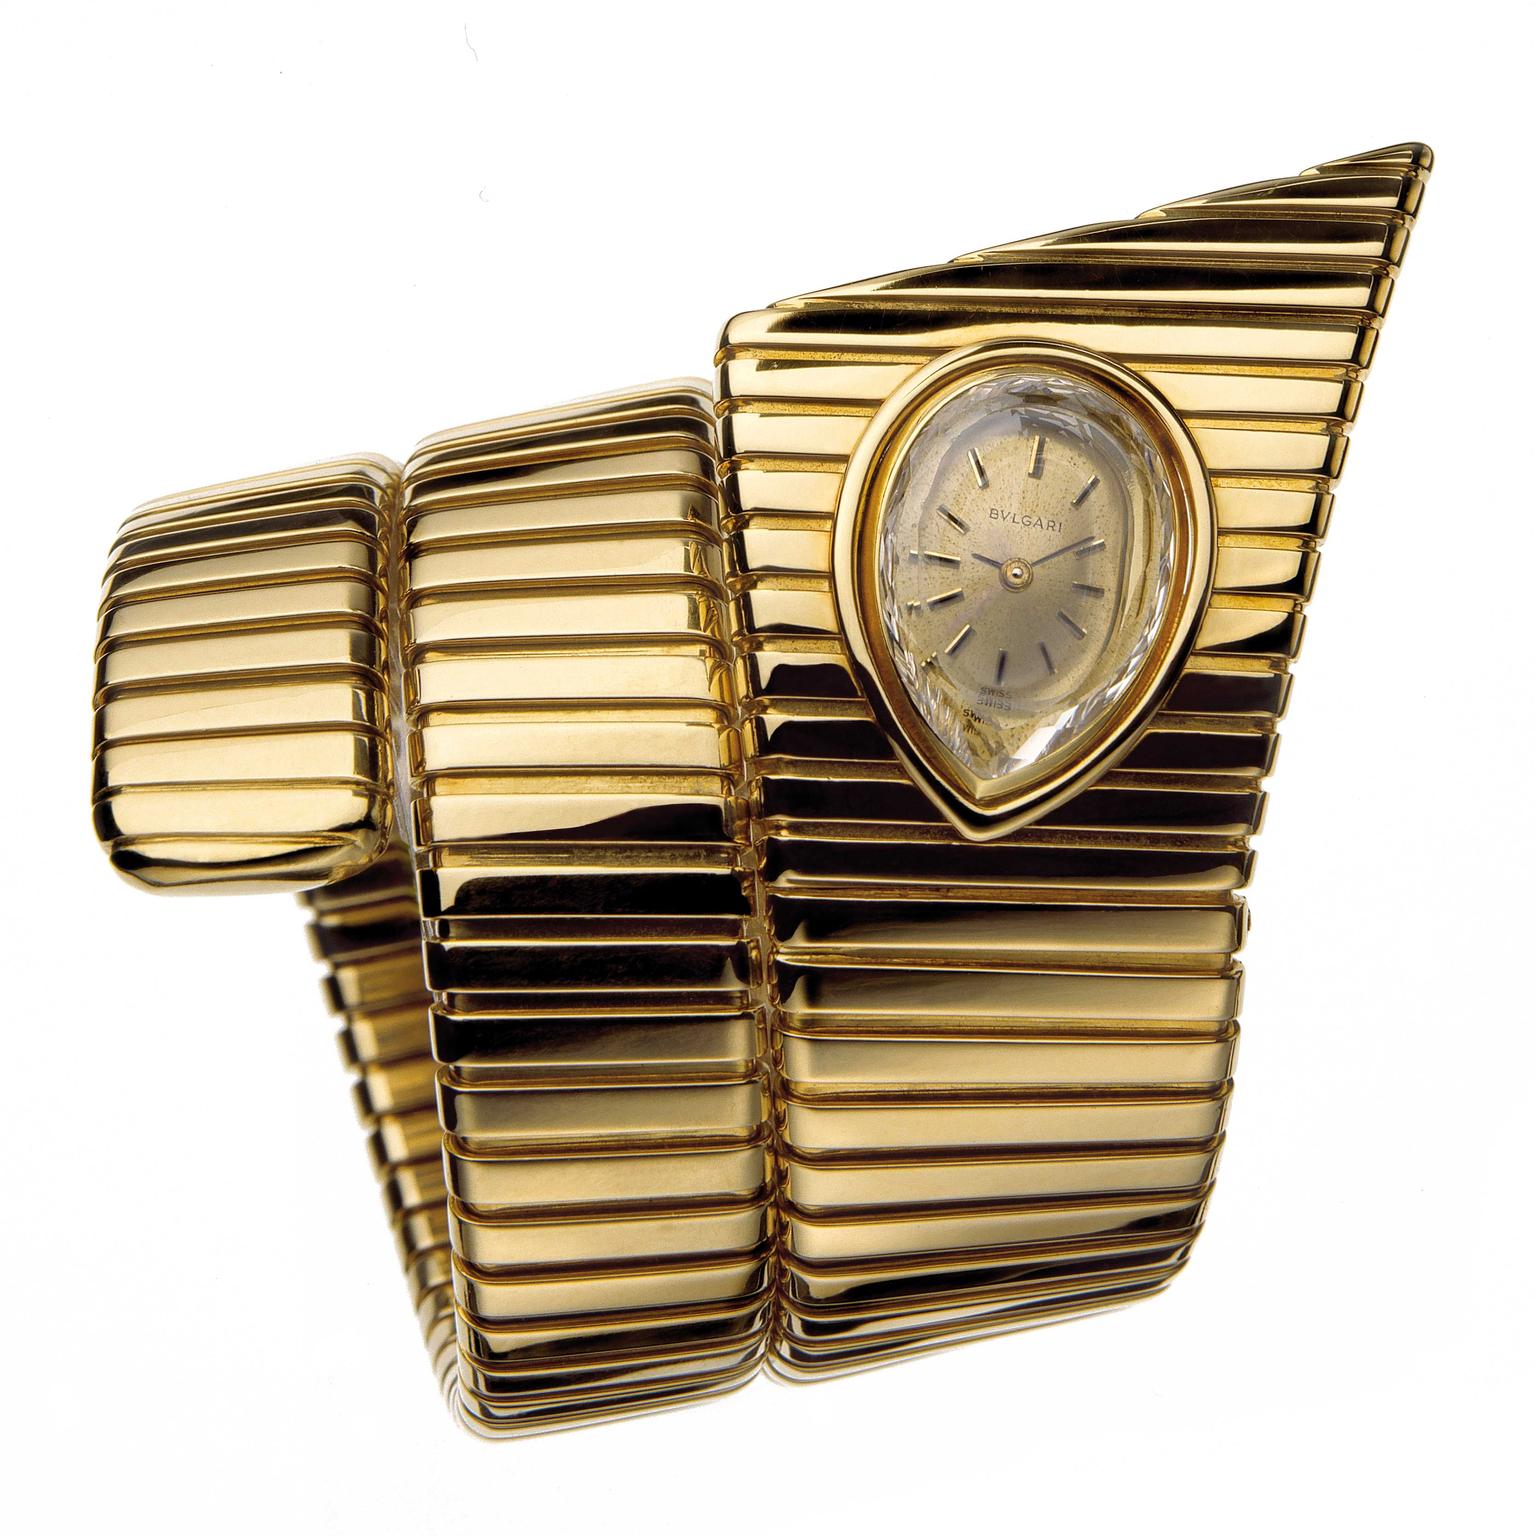 Bulgari Tubogas watch in yellow gold that was in production period in 1972